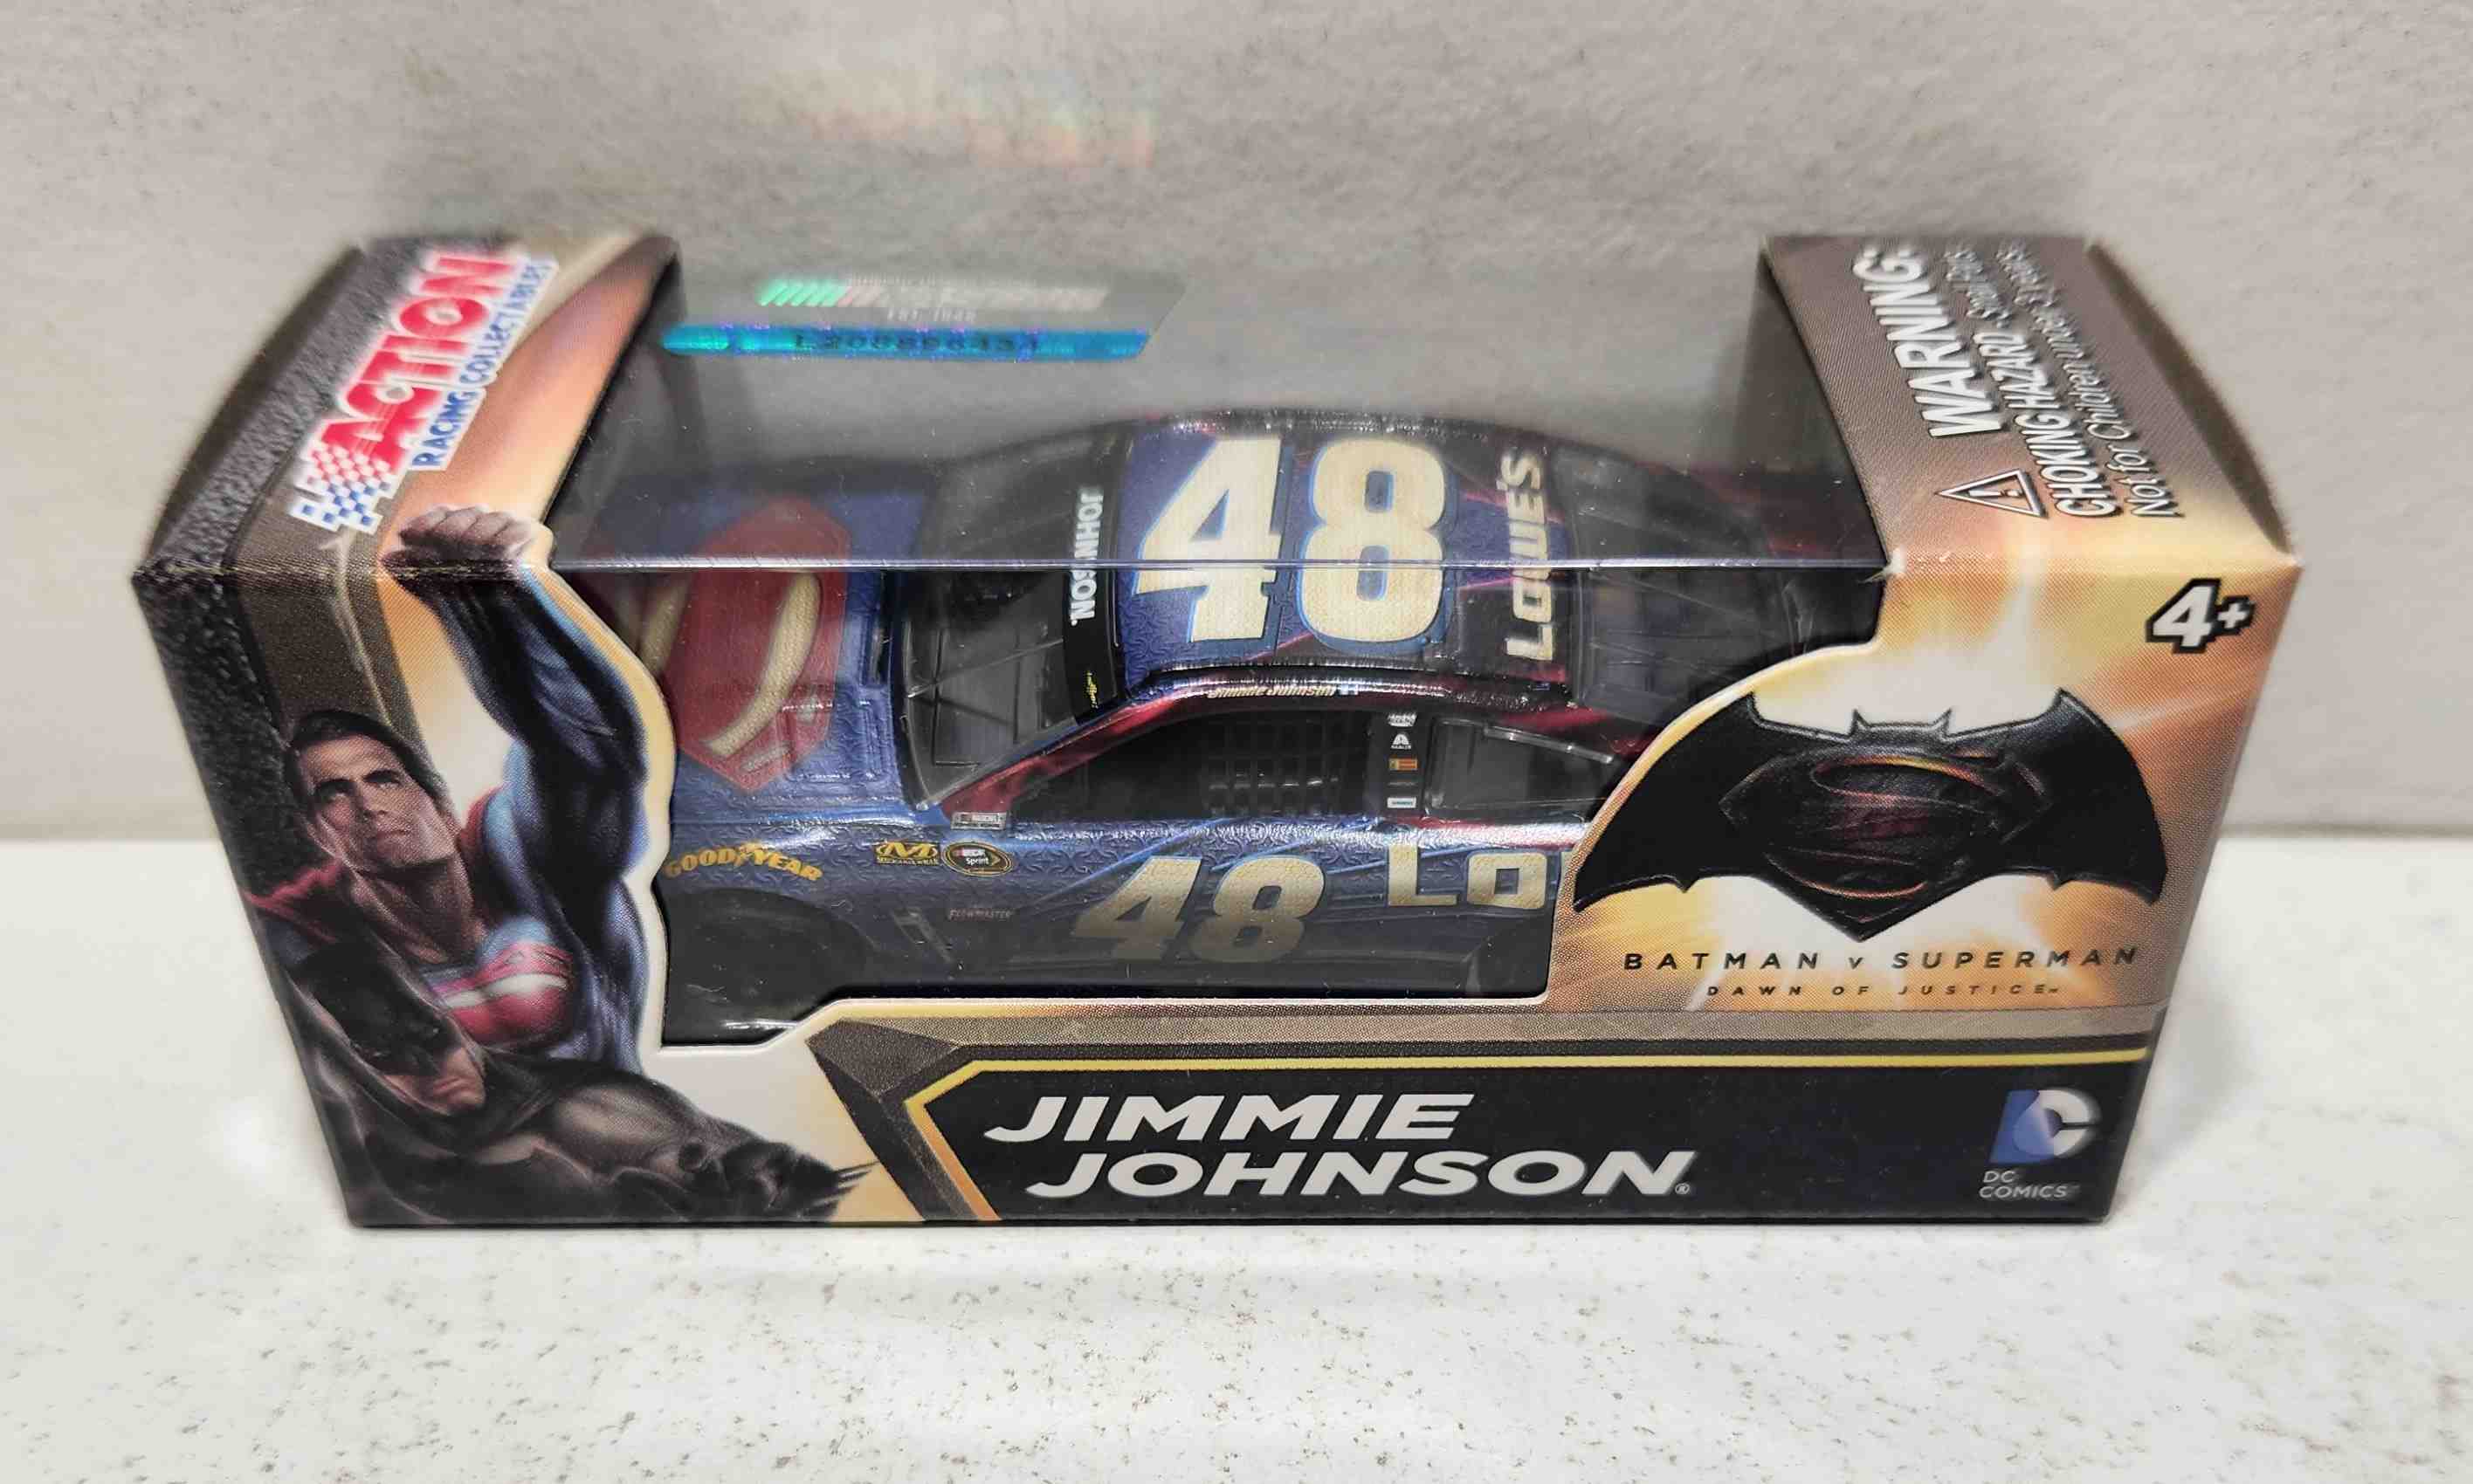 2016 Jimmie Johnson 1/64th Lowe's "Superman" Pitstop Series Chevrolet SS